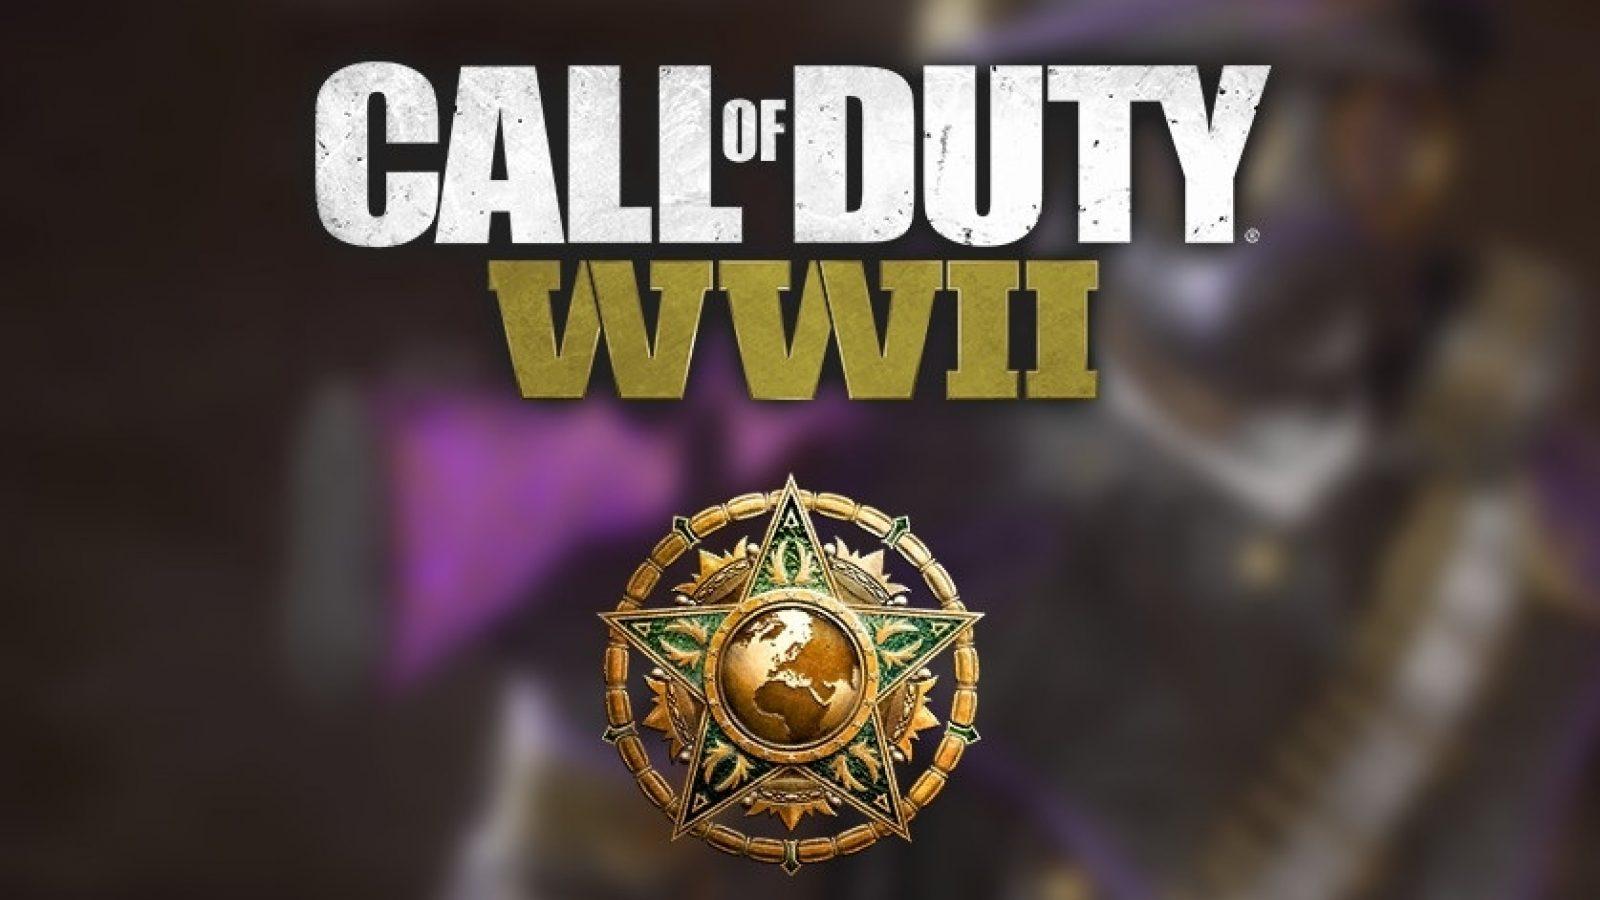 Mastering the Commando Division in Call of Duty: WWII